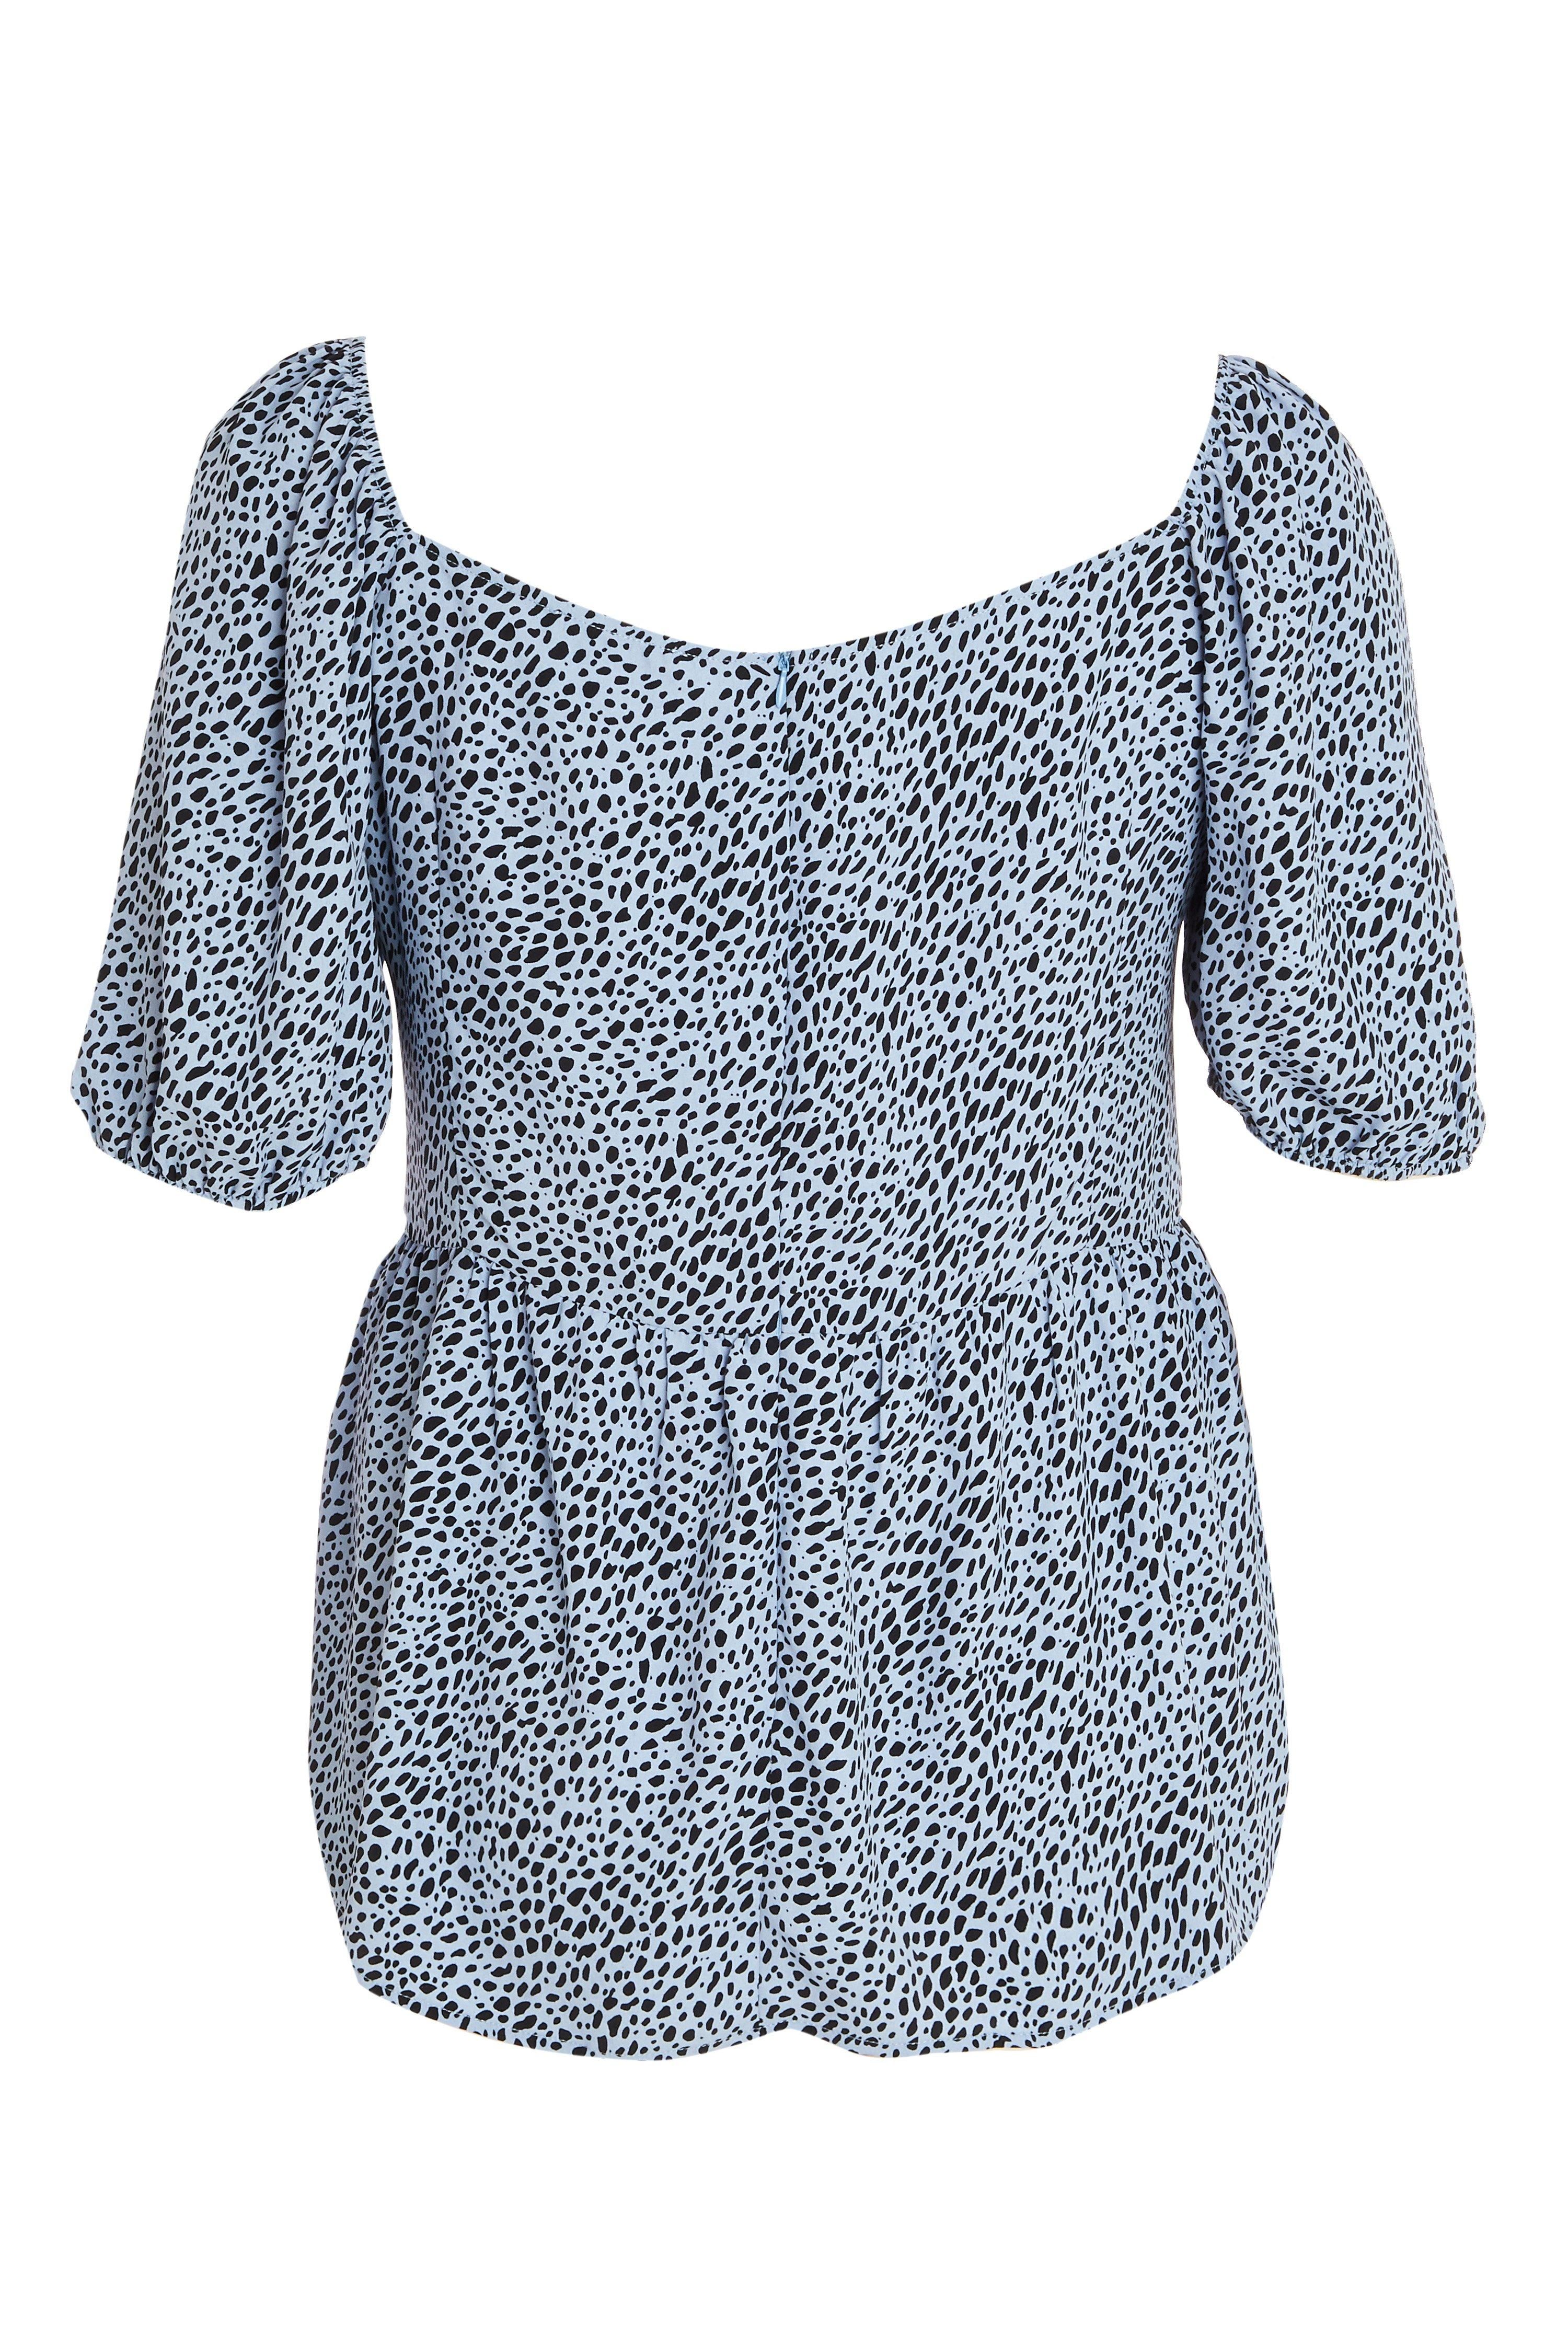 - Curve collection  - Dalmatian print   - Button front   - Square neckline   - Puff sleeve  - Length: 60cm approx  - Model height: 5' 9